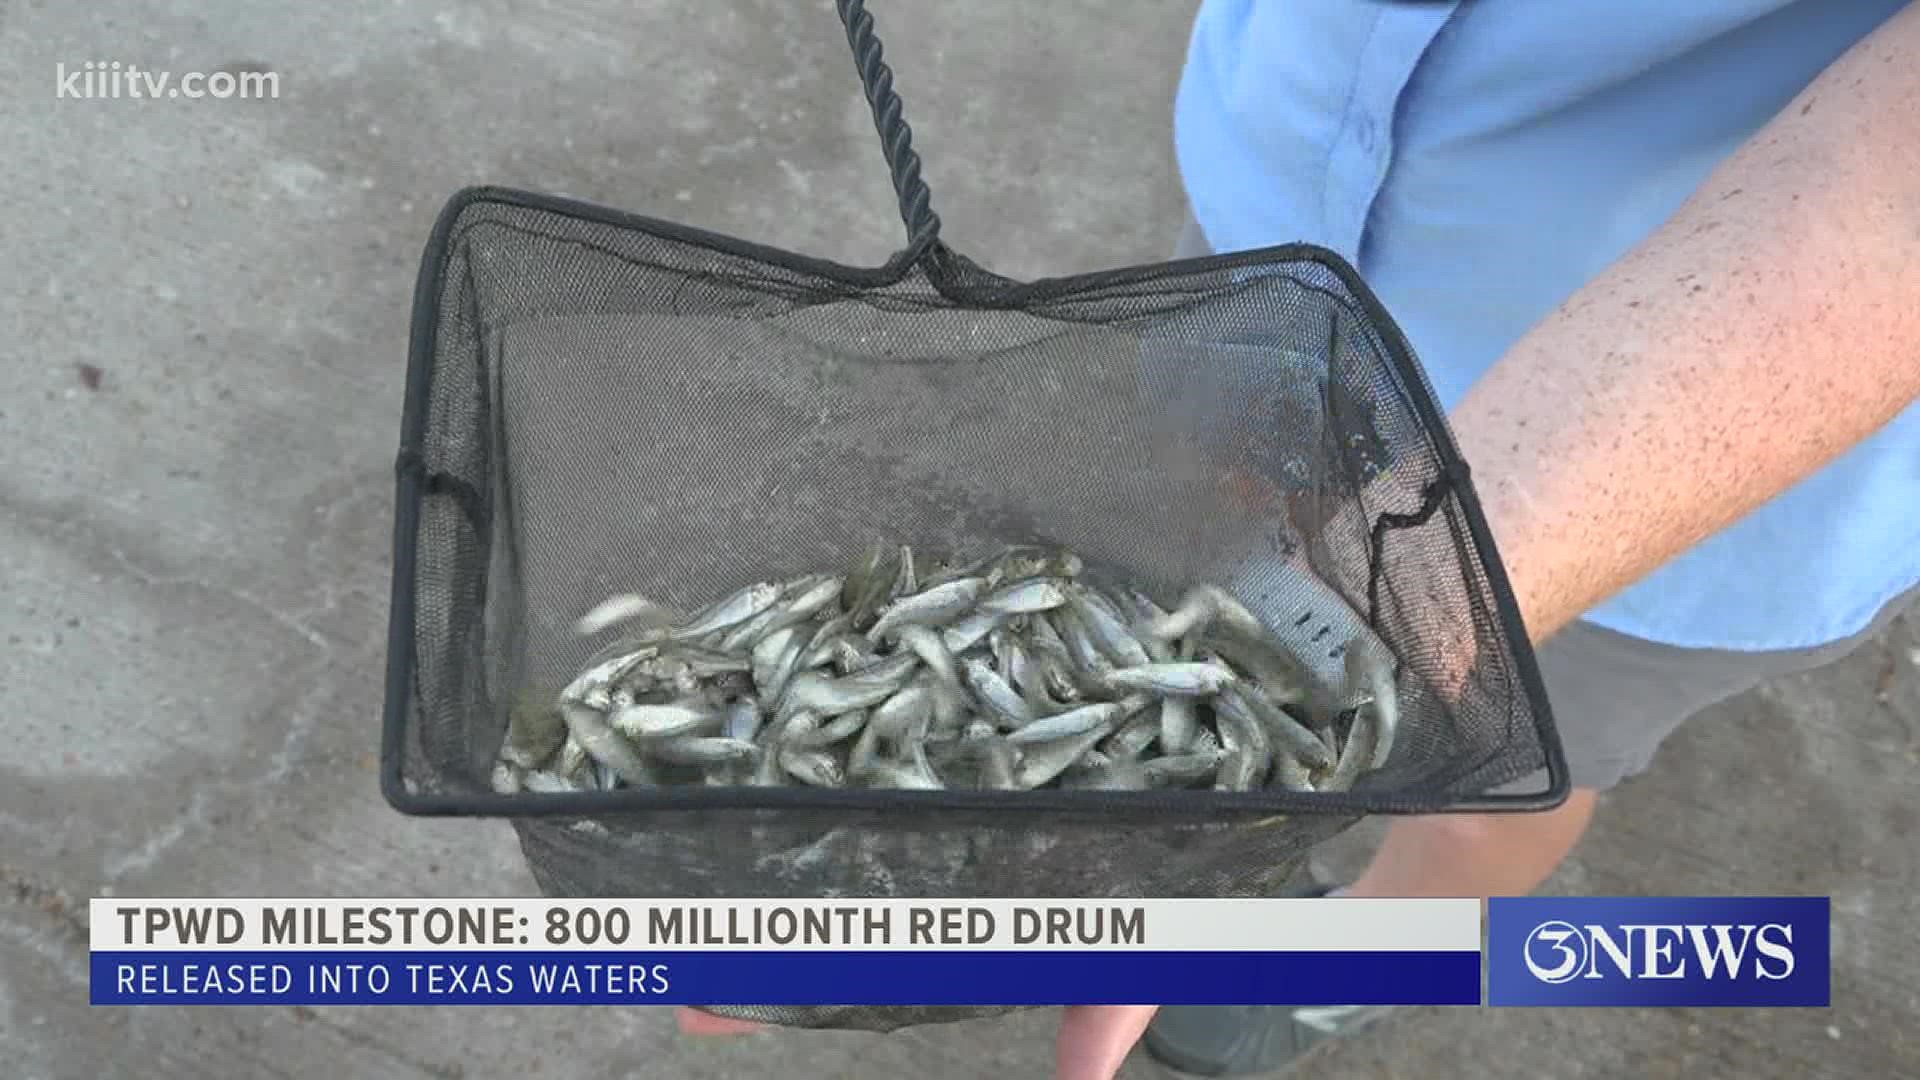 Early Thursday morning, a Texas milestone was reached, as the 800 millionth Red Drum was released into Texas waters, according to TPWD.